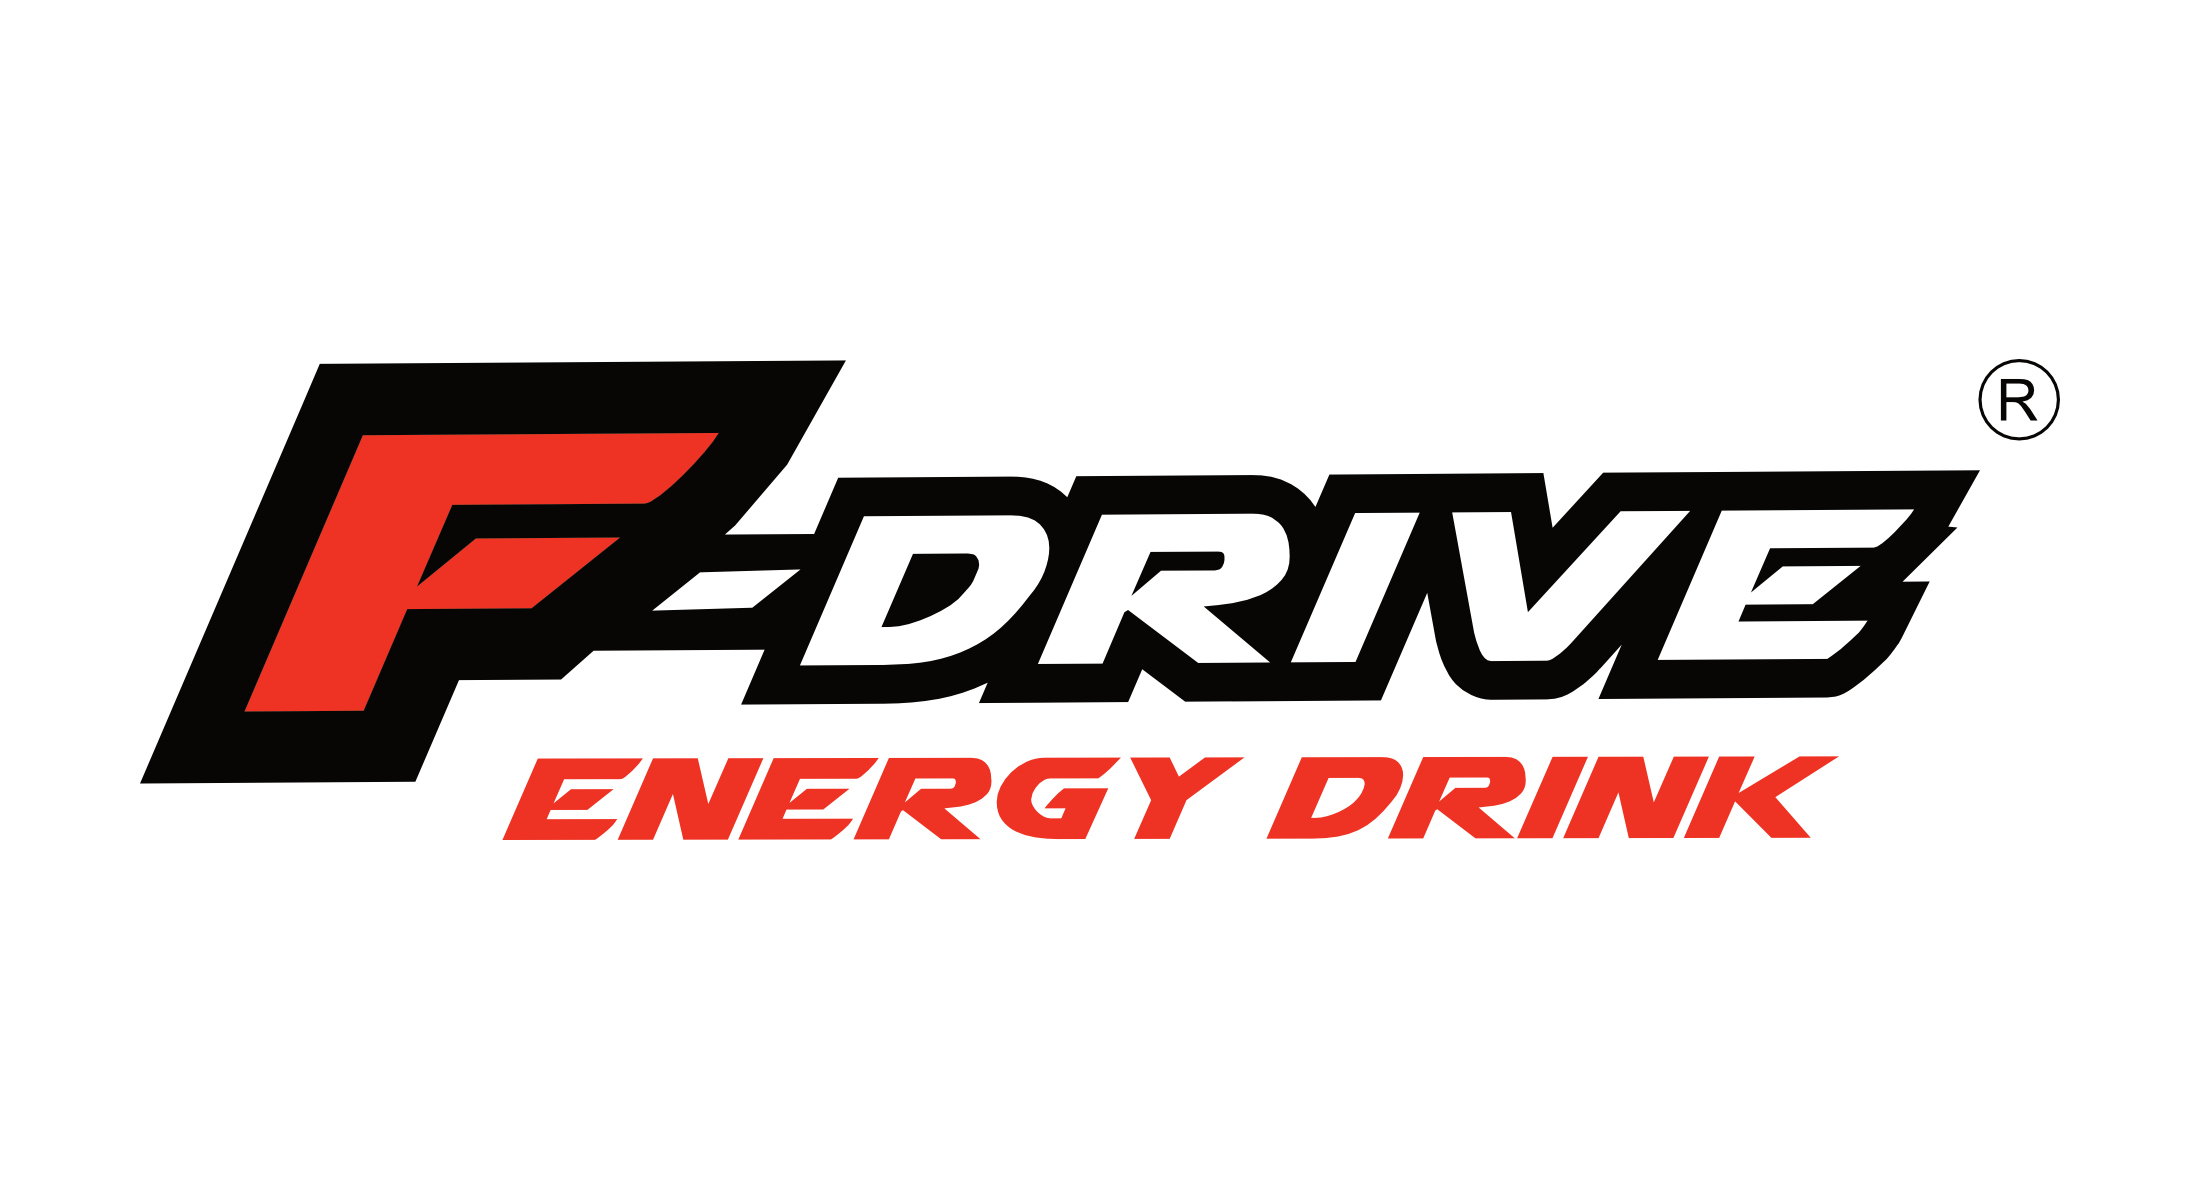 Introducing the new series F-DRIVE CUP